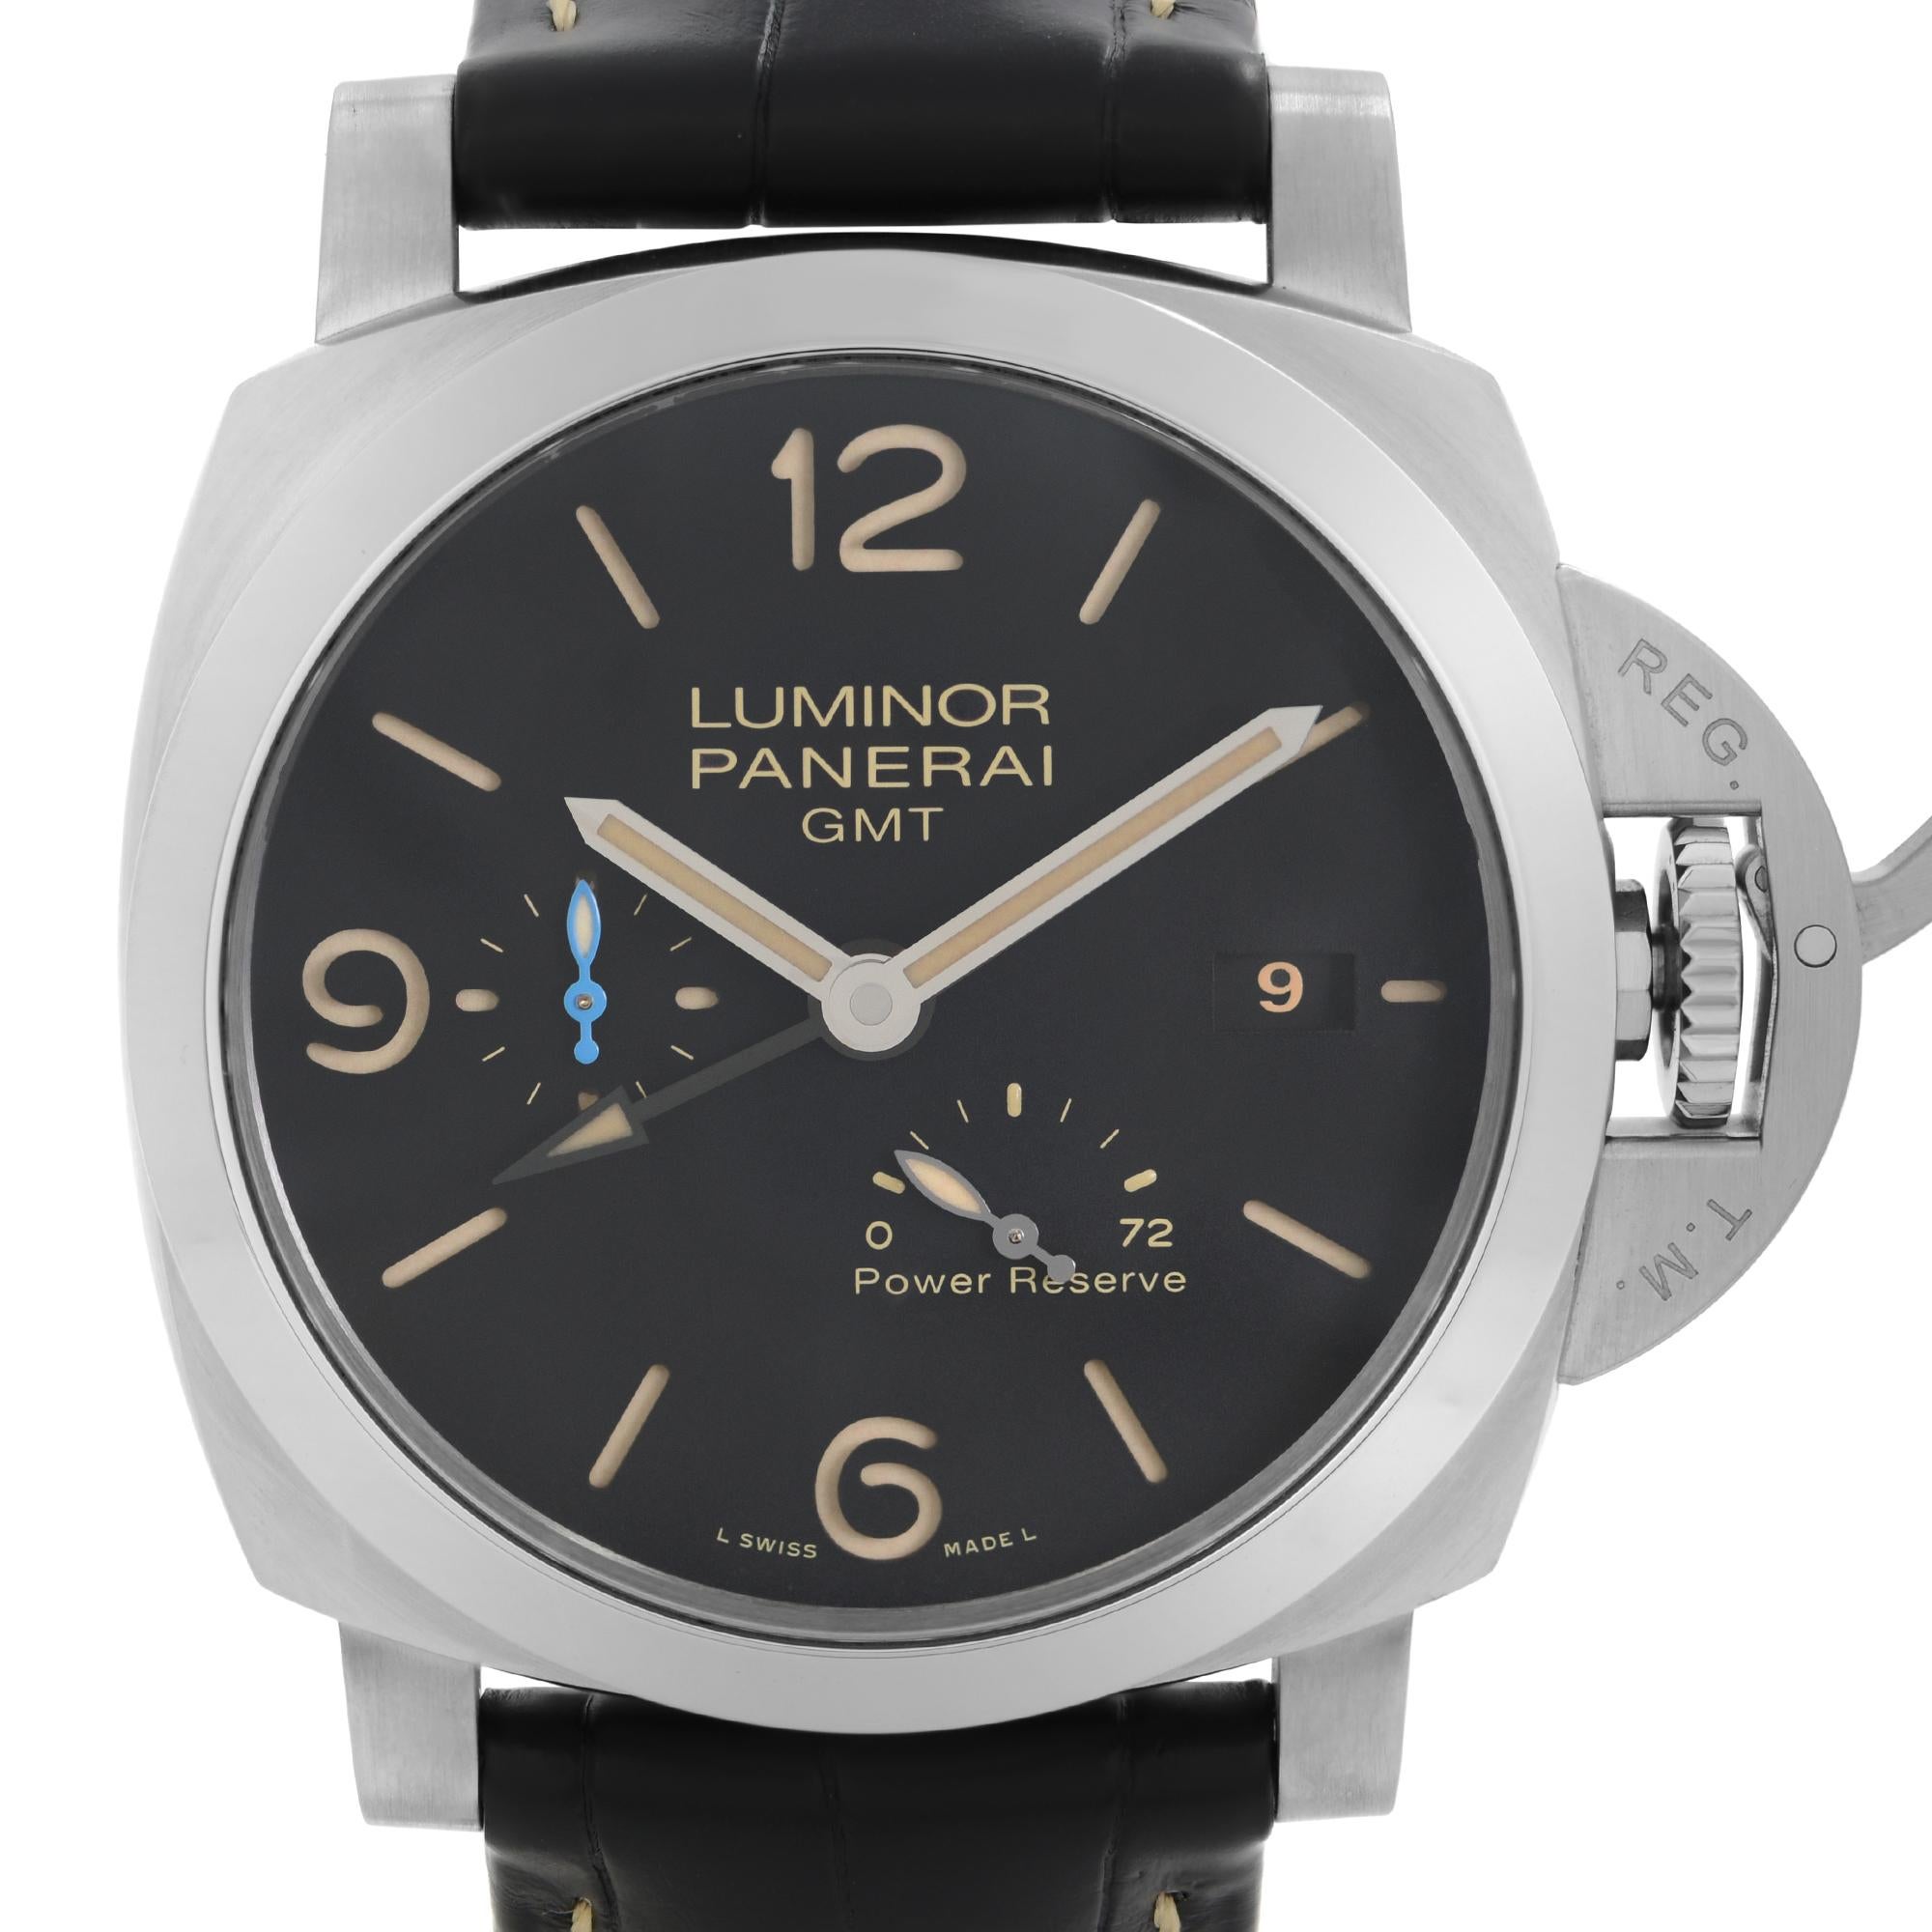 Display Model Panerai Luminor GMT Steel Black Dial Leather Strap Automatic Mens Watch PAM01321. Sandwich Dial, This Beautiful Timepiece is Powered By Mechanical (Automatic) Movement and Features: Stainless Steel Case with Black Leather Strap, Fixed